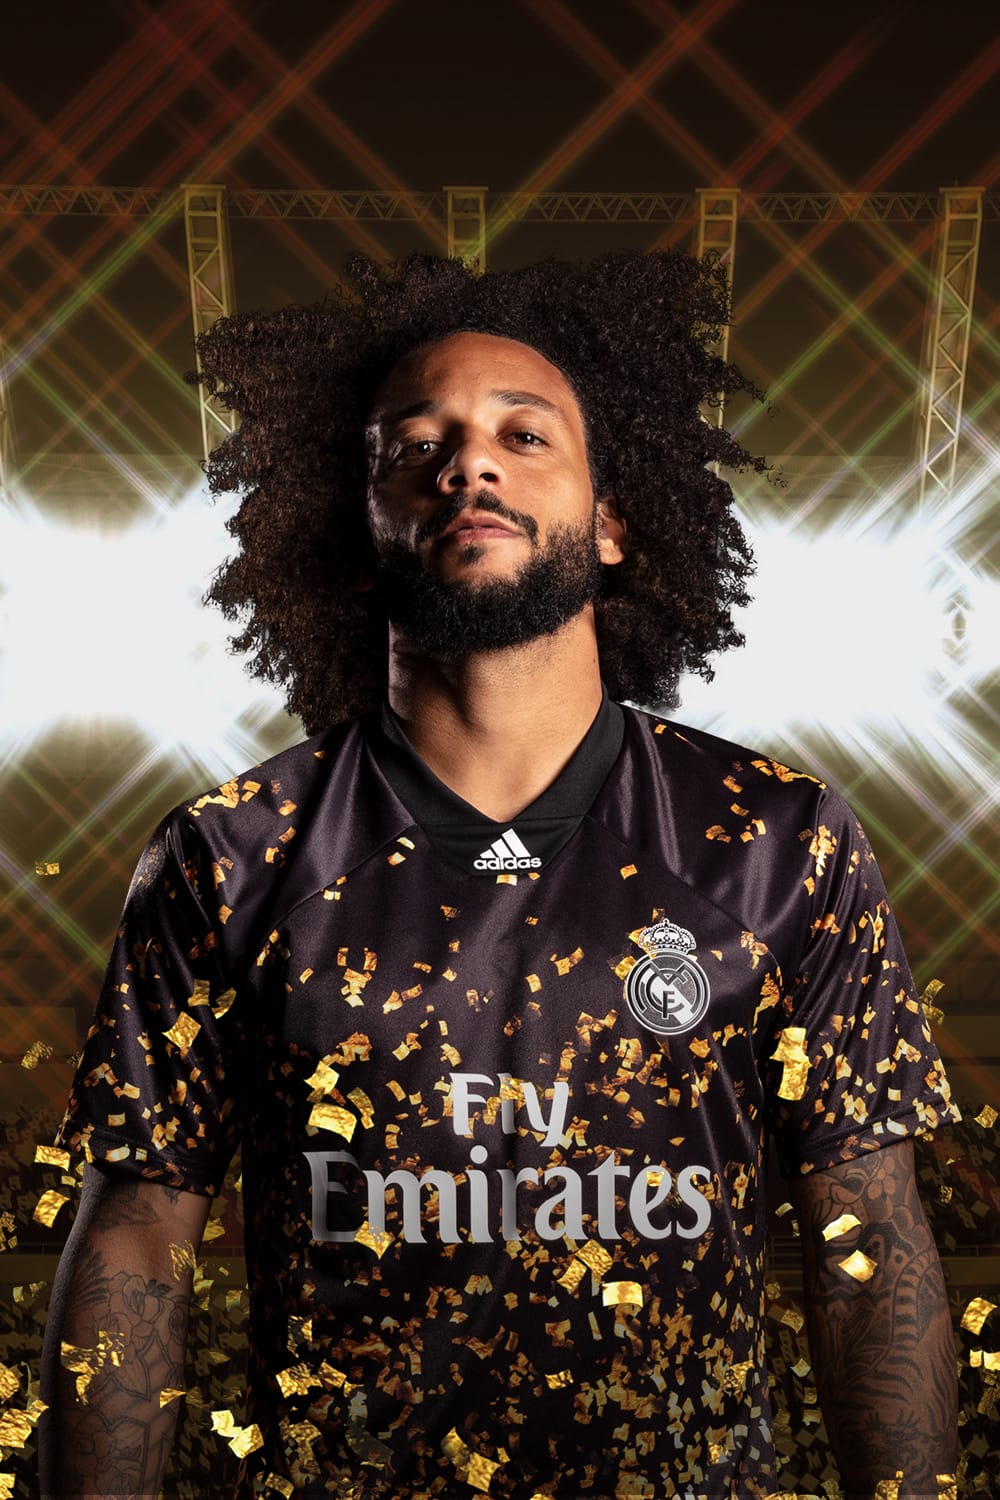 real madrid limited edition kit